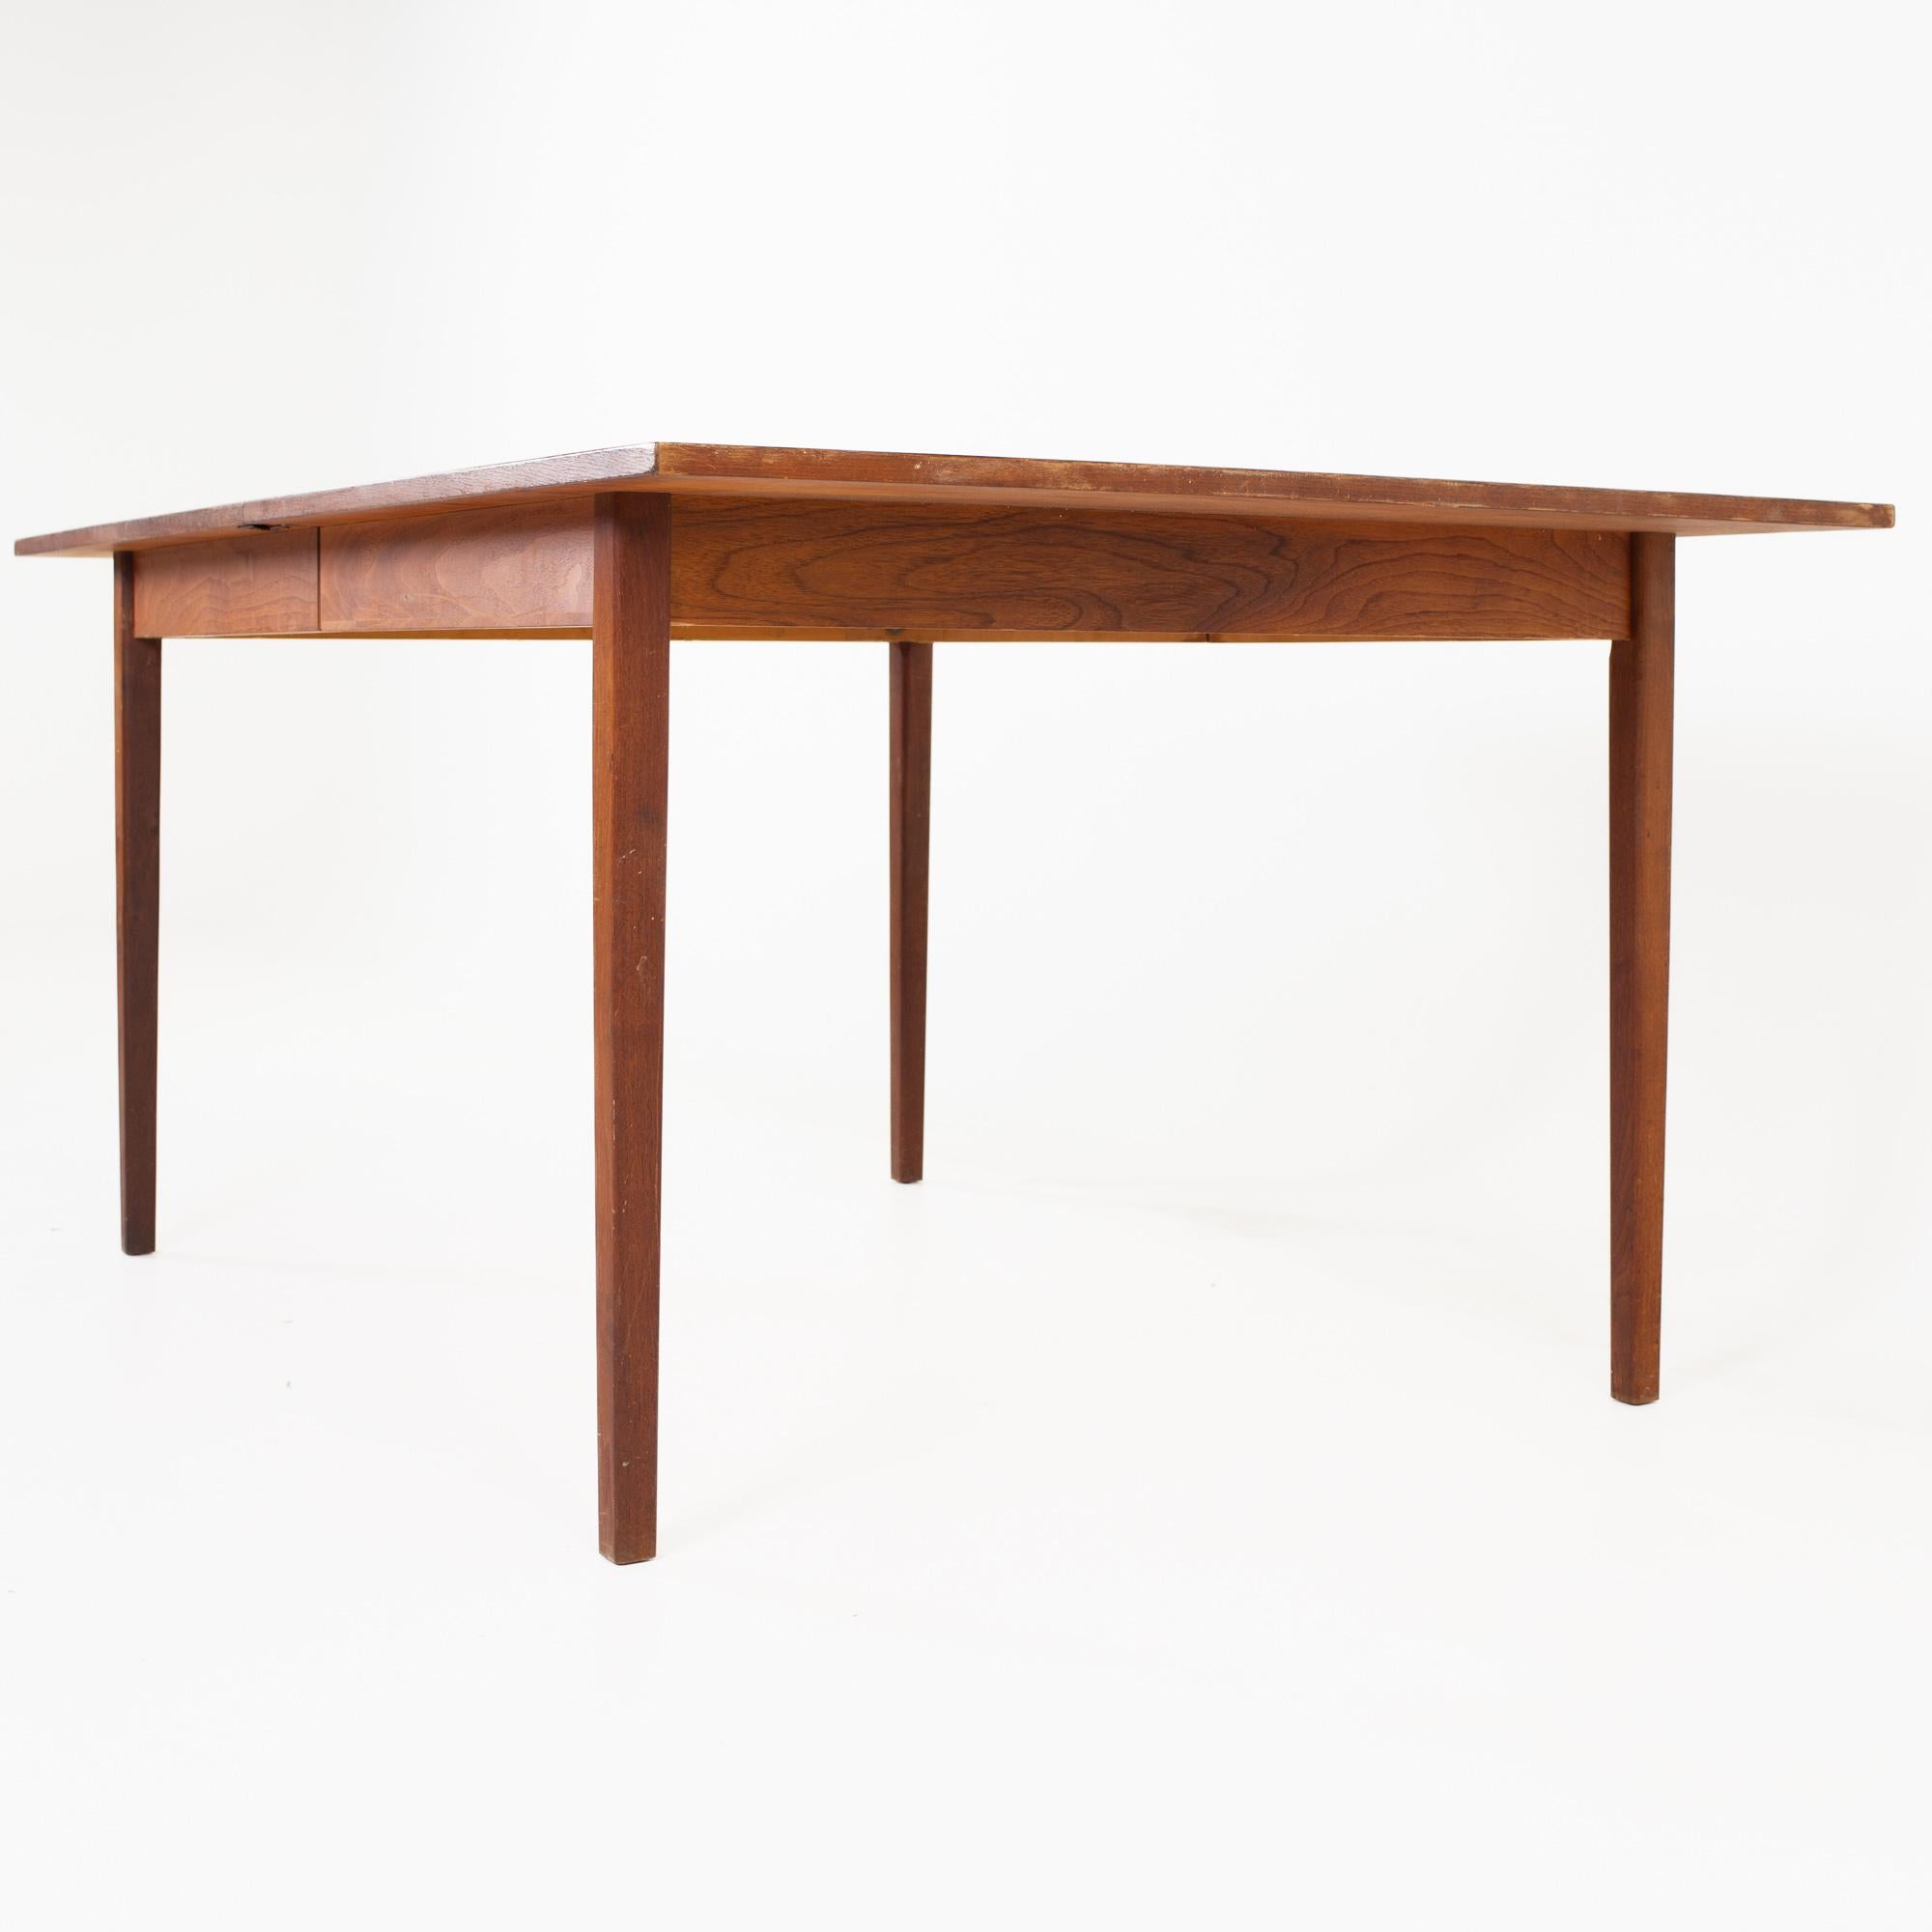 John Stuart for Mount Airy Style Mid Century Walnut Dining Table with Leaf 1